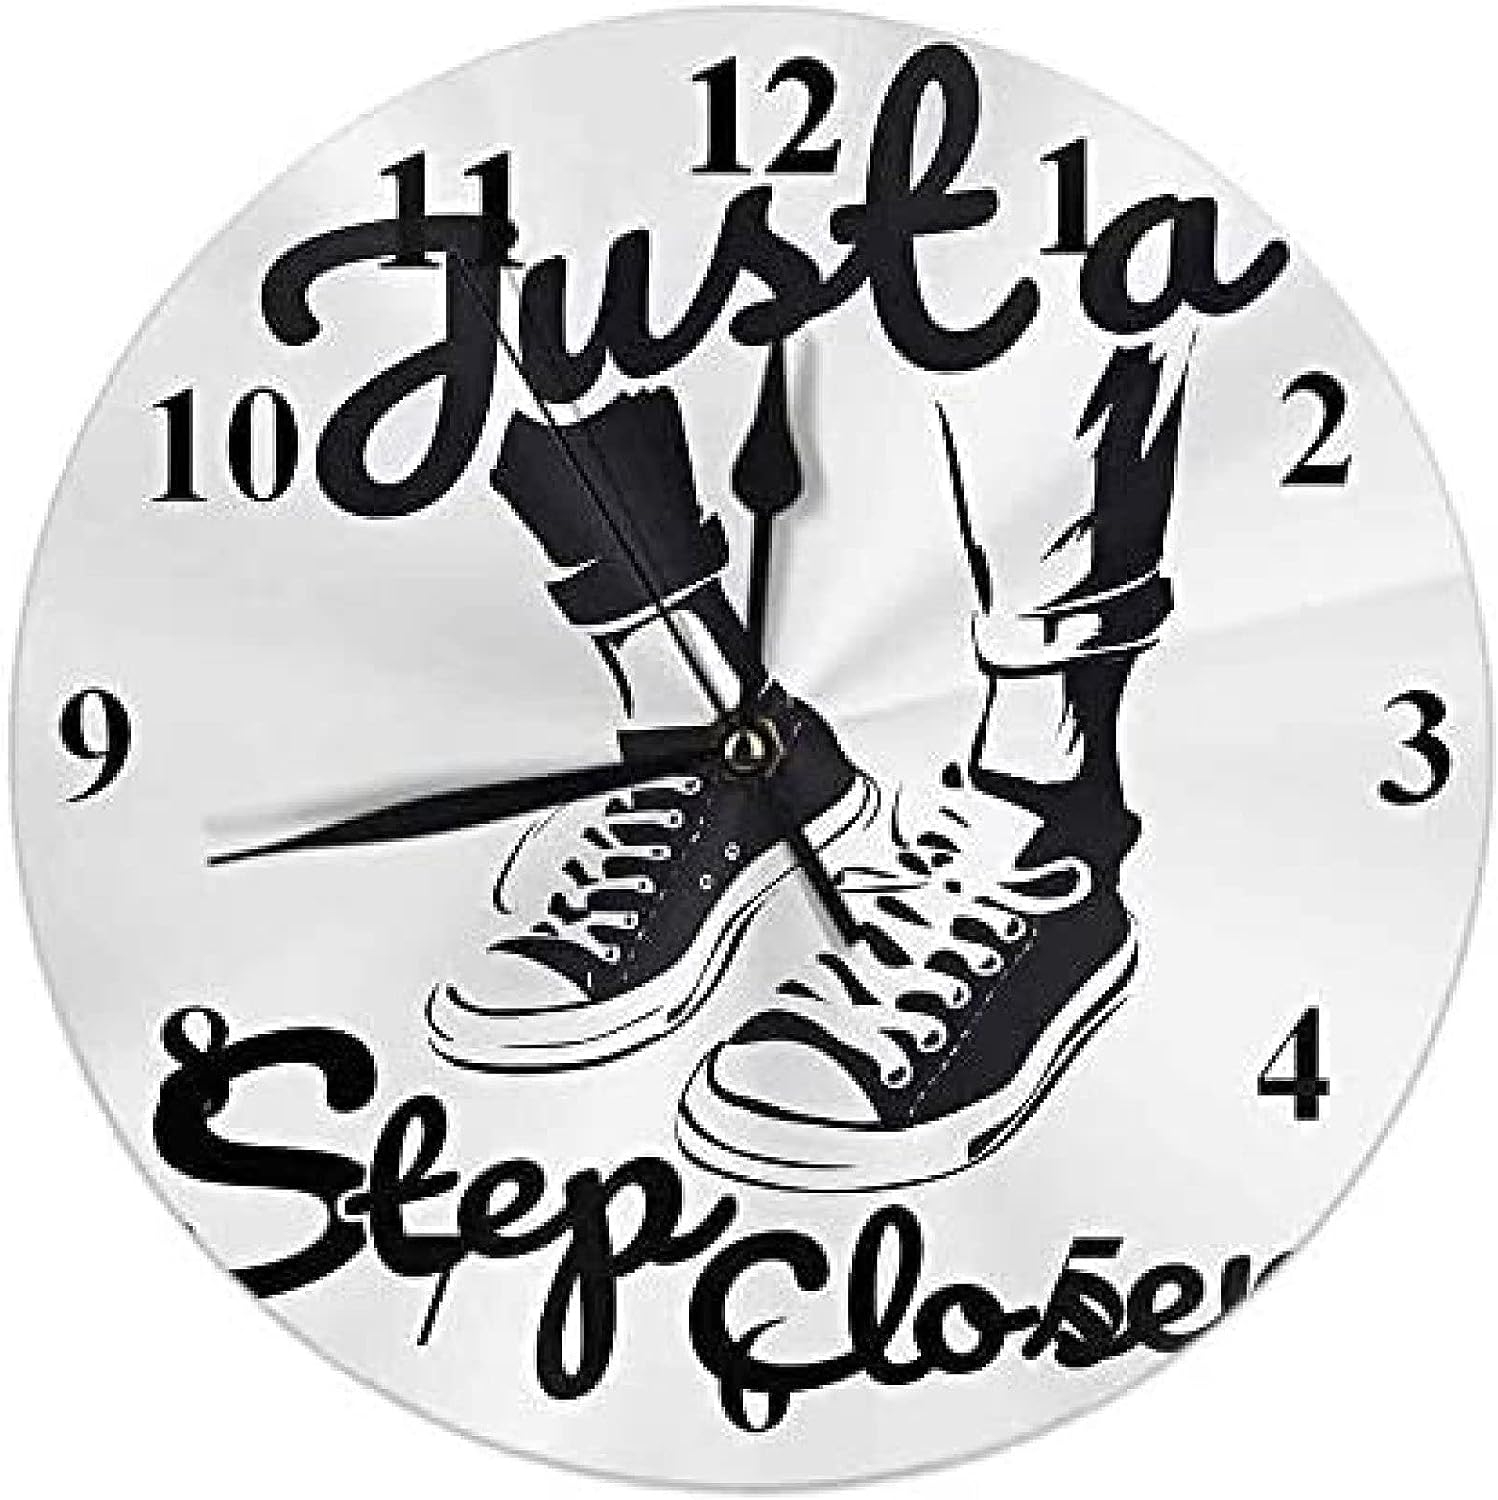 Justa Step Claser Clock Slogan with Legs On Sneakers Round Wall Clocks Home Decor for Living Room Bedroom Kitchen Office 10 Inch